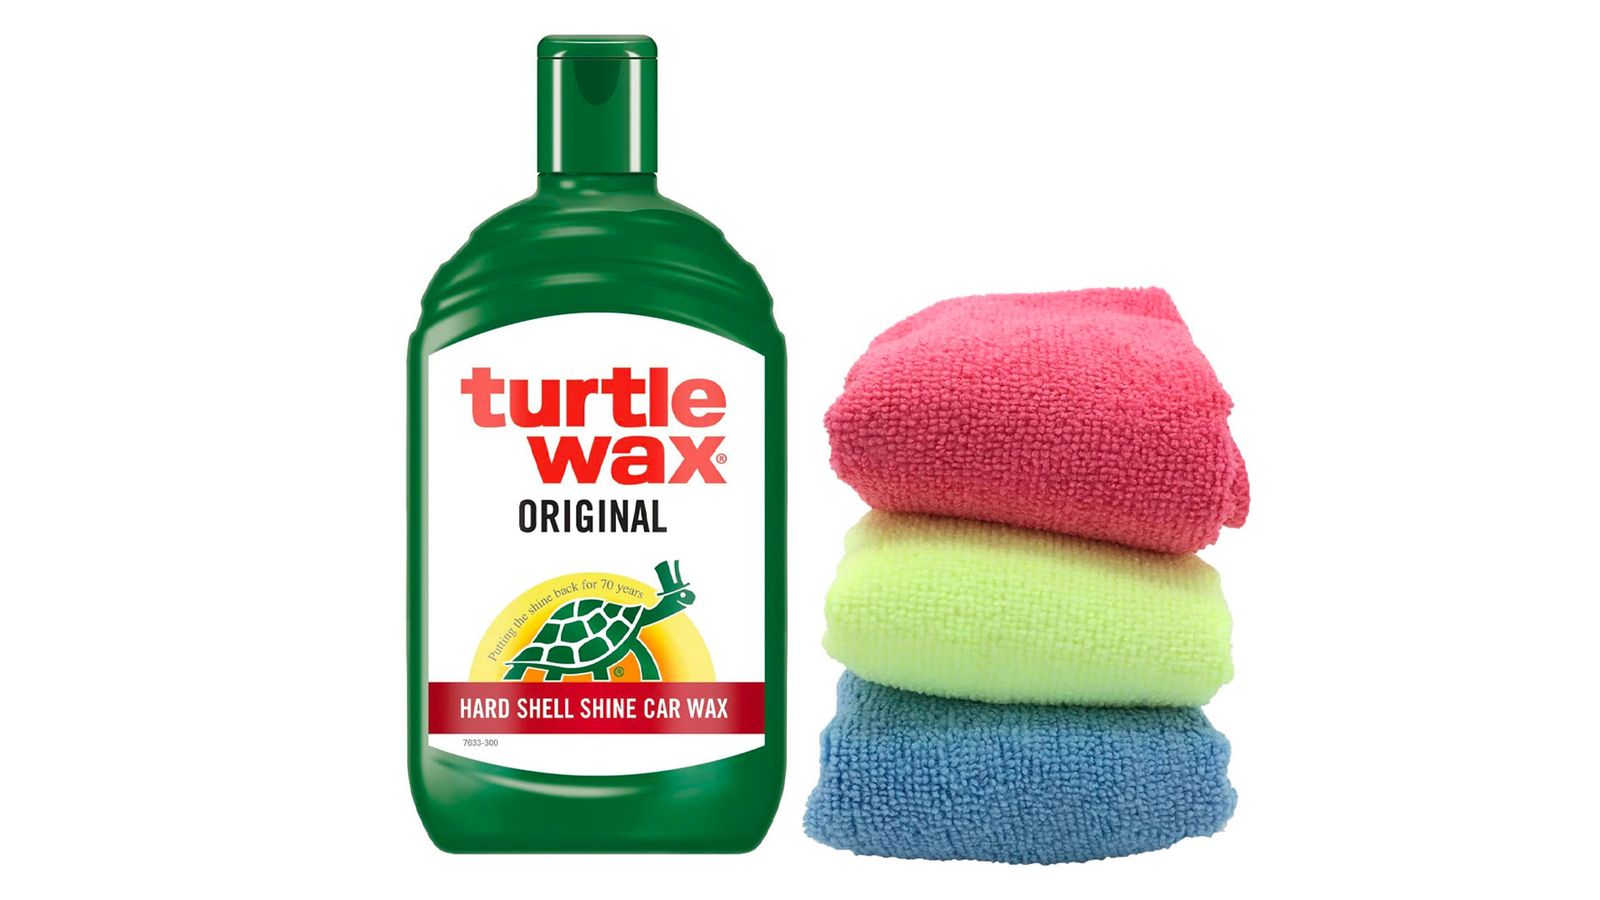 Turtle Wax Original Car Wax product image of a green bottle with a white and red label next to blue, yellow, and red microfibre clothes.